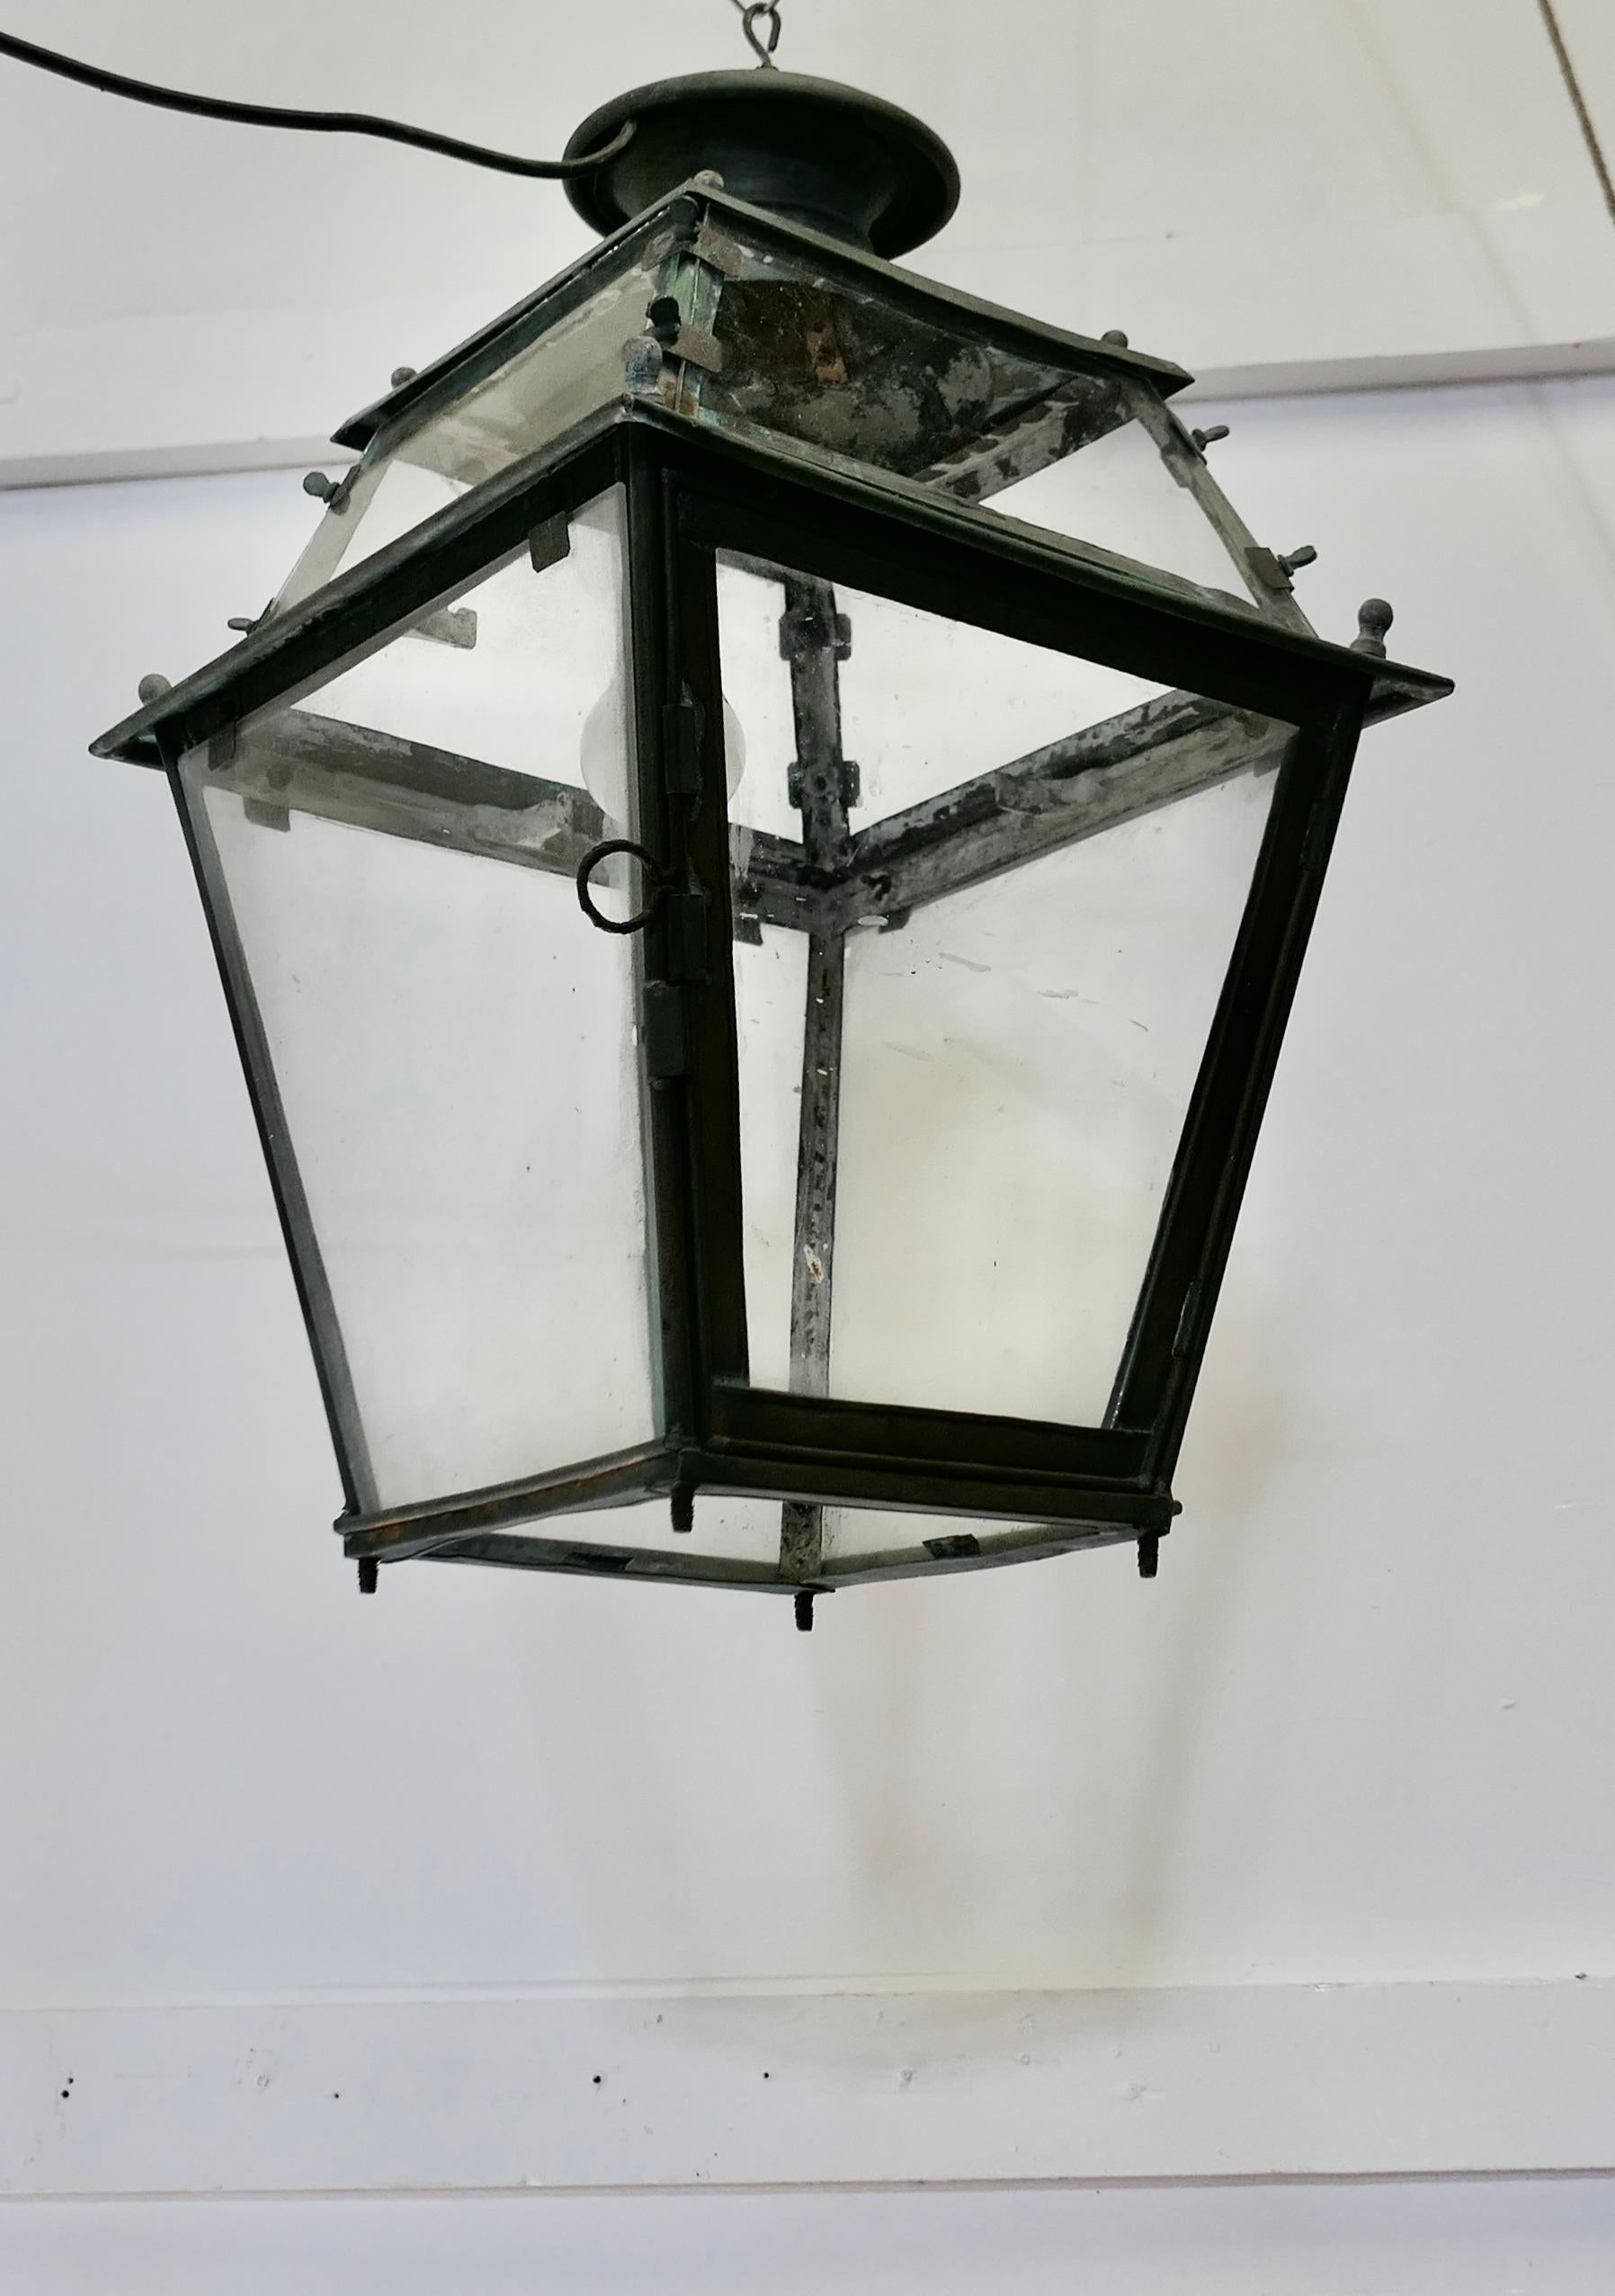 Large 19th Century Copper Hanging Lantern

This is a Large Copper Lantern it has a natural oxidised patina, the Lamp has 4 glazed sides with a door on one side, the lantern can be hung from above, it has not been wire for electricity but we have